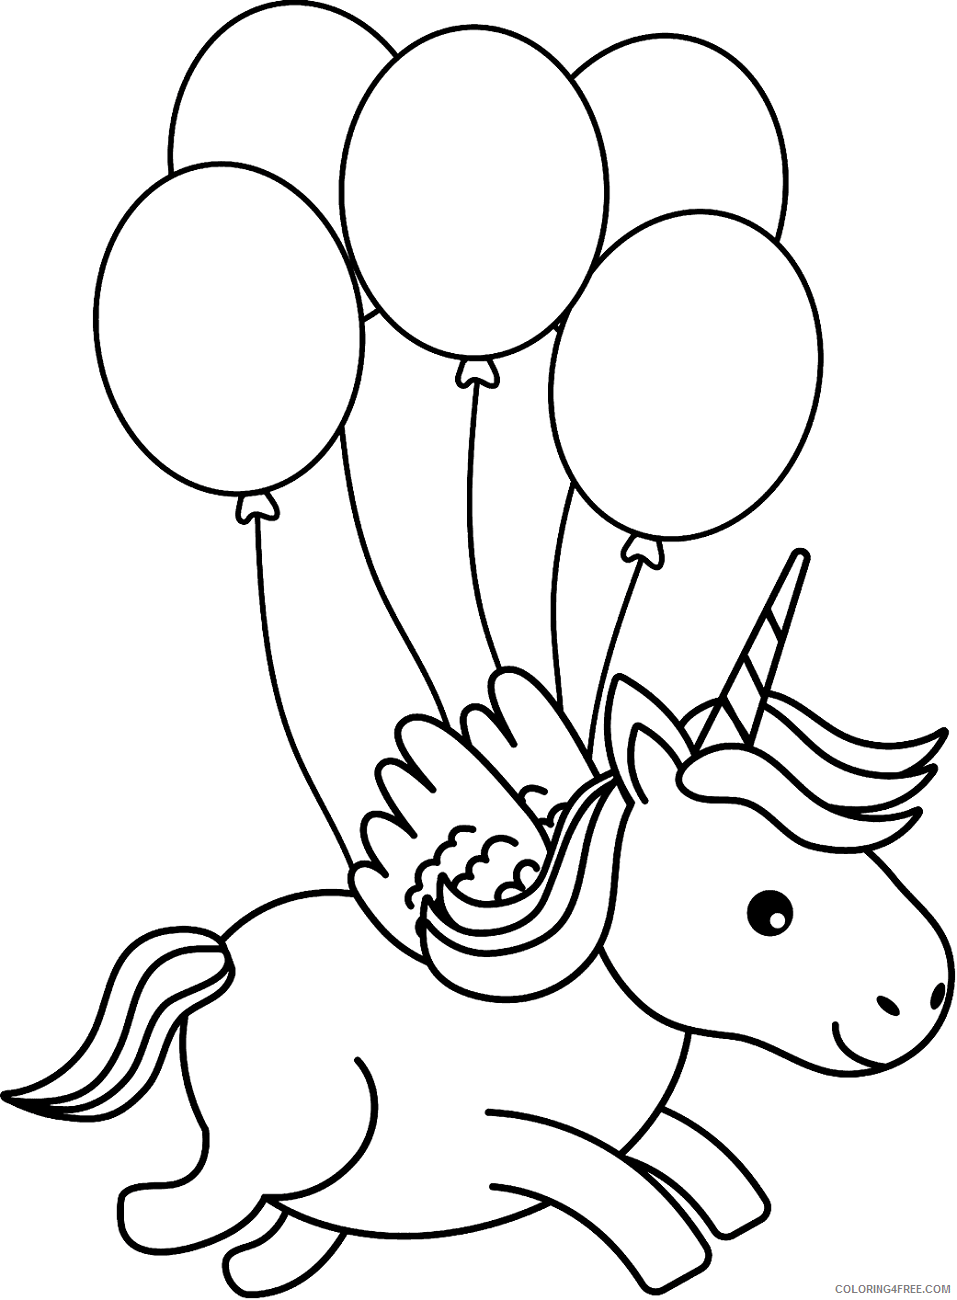 Winged Unicorn Coloring Pages little_unicorn_with_balloons Printable 2021 6293 Coloring4free